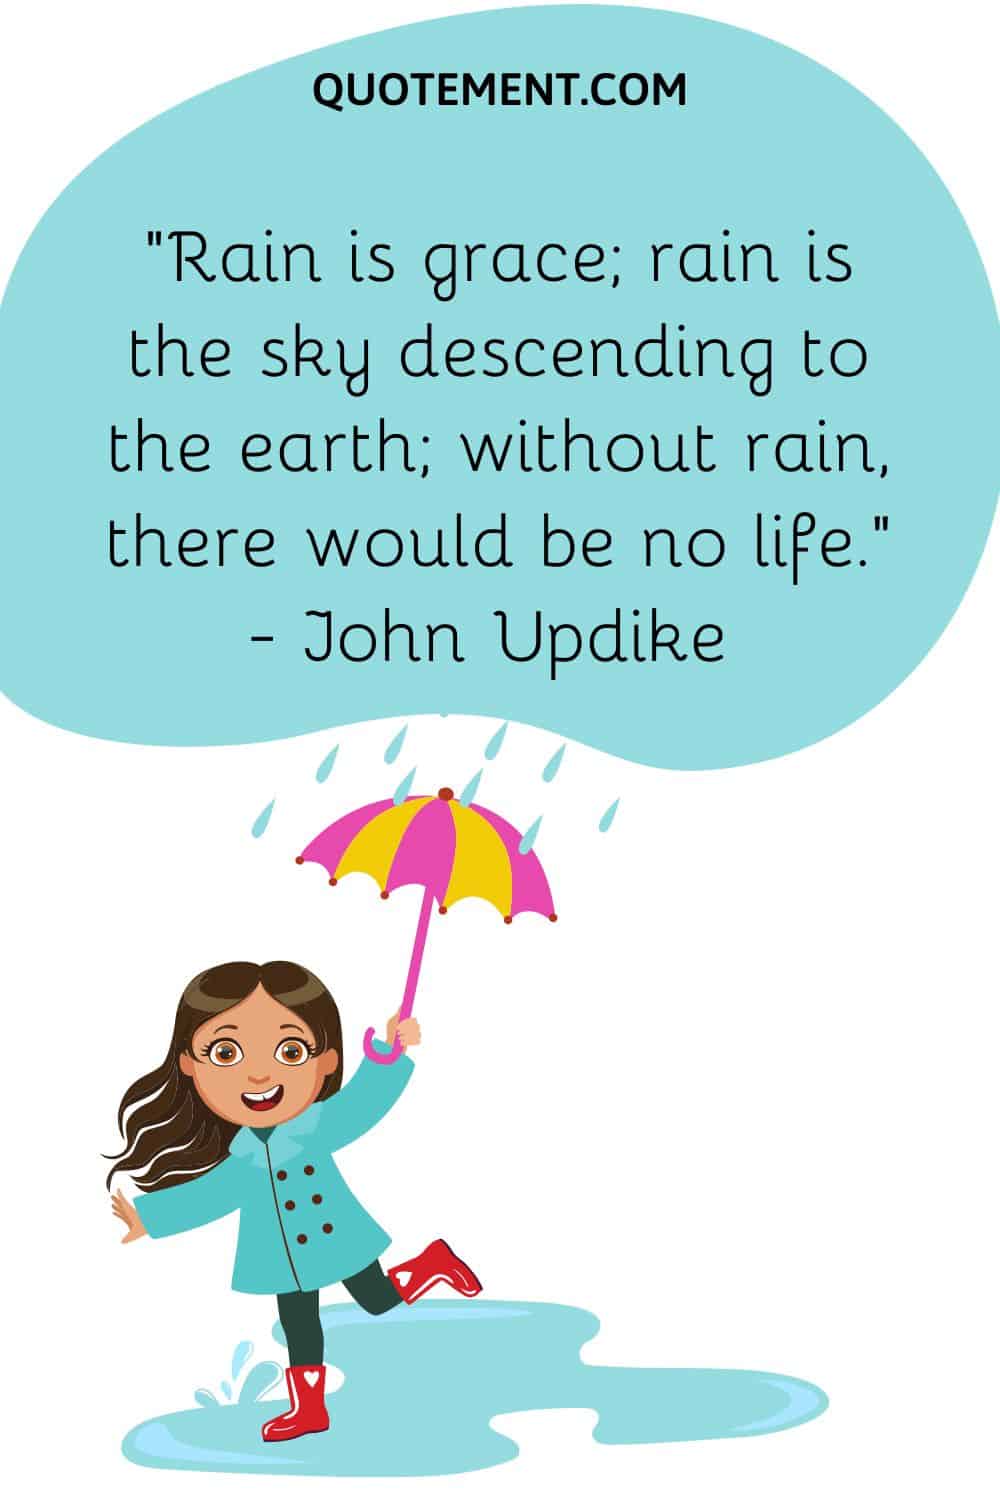 Rain is grace; rain is the sky descending to the earth; without rain, there would be no life